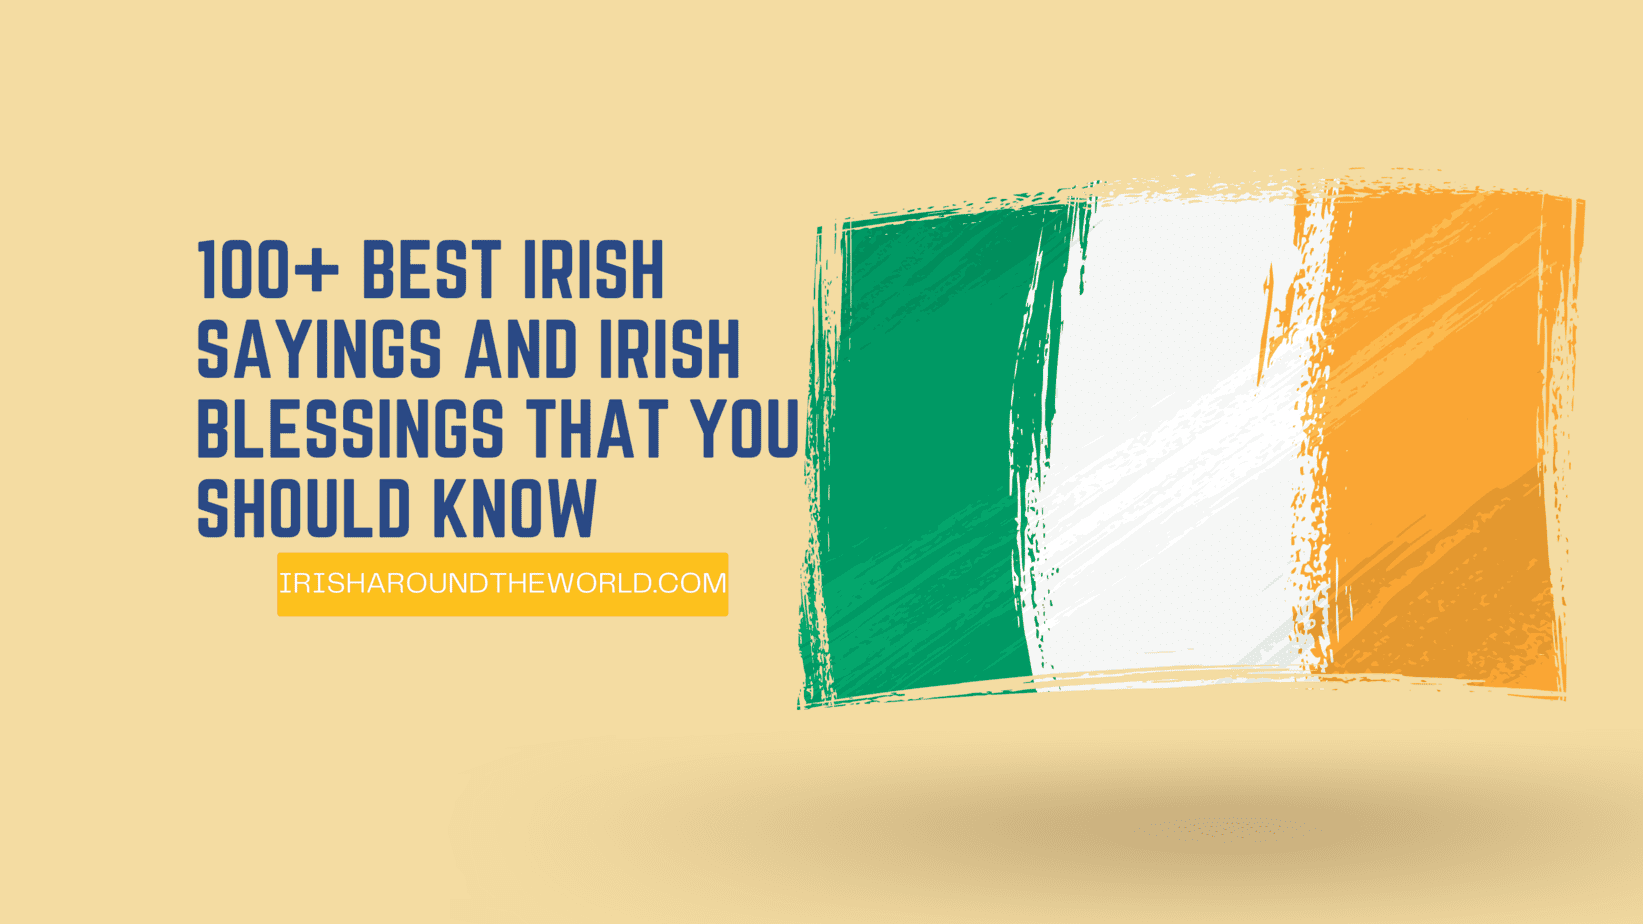 100+ Best Irish Sayings And Irish Blessings That You Should Know